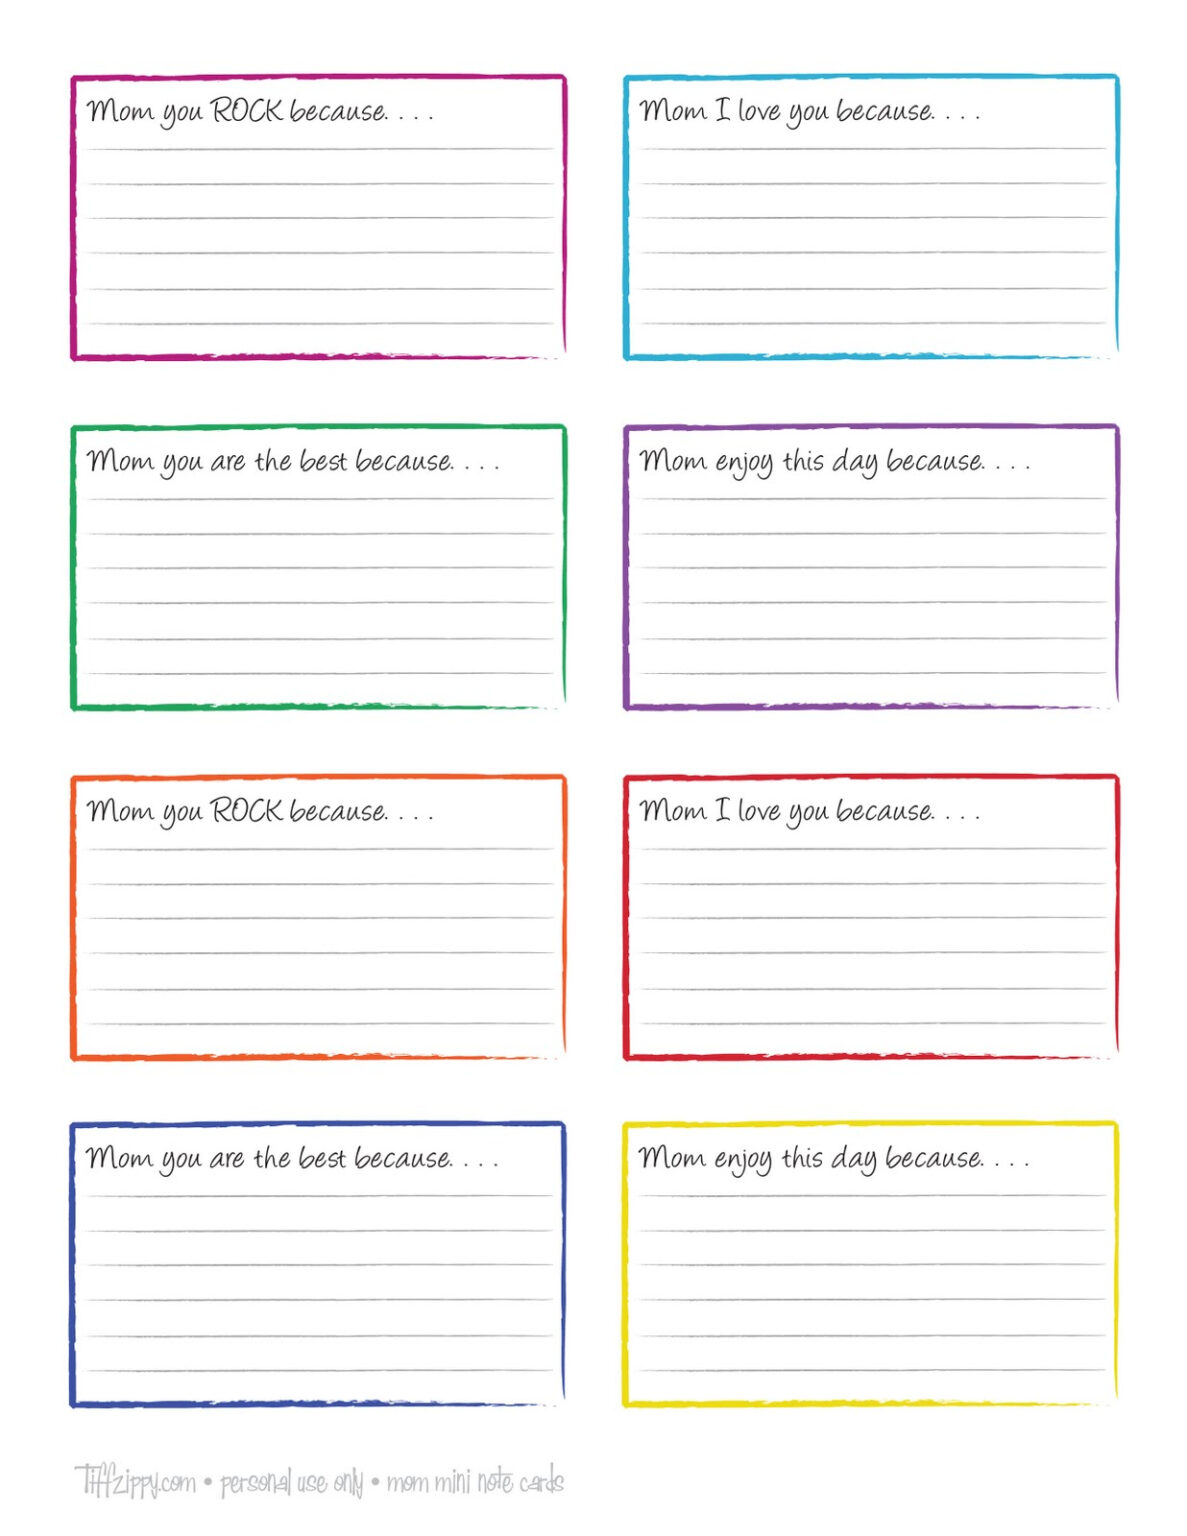 3X5 Flash Card Template Calep.midnightpig.co For Google Docs Note